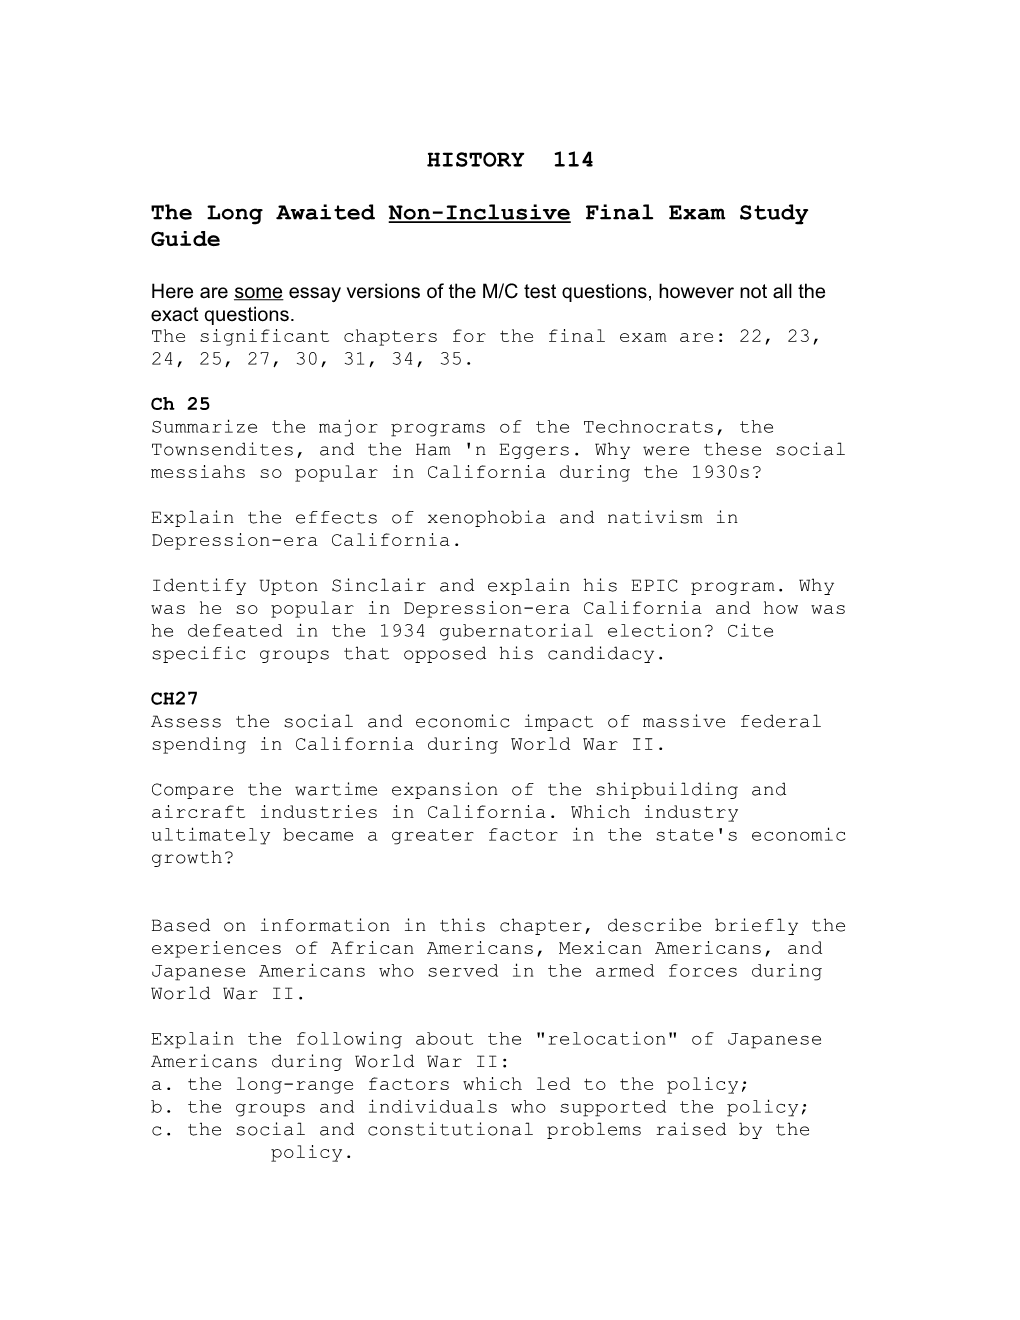 The Long Awaited Non-Inclusive Final Exam Study Guide